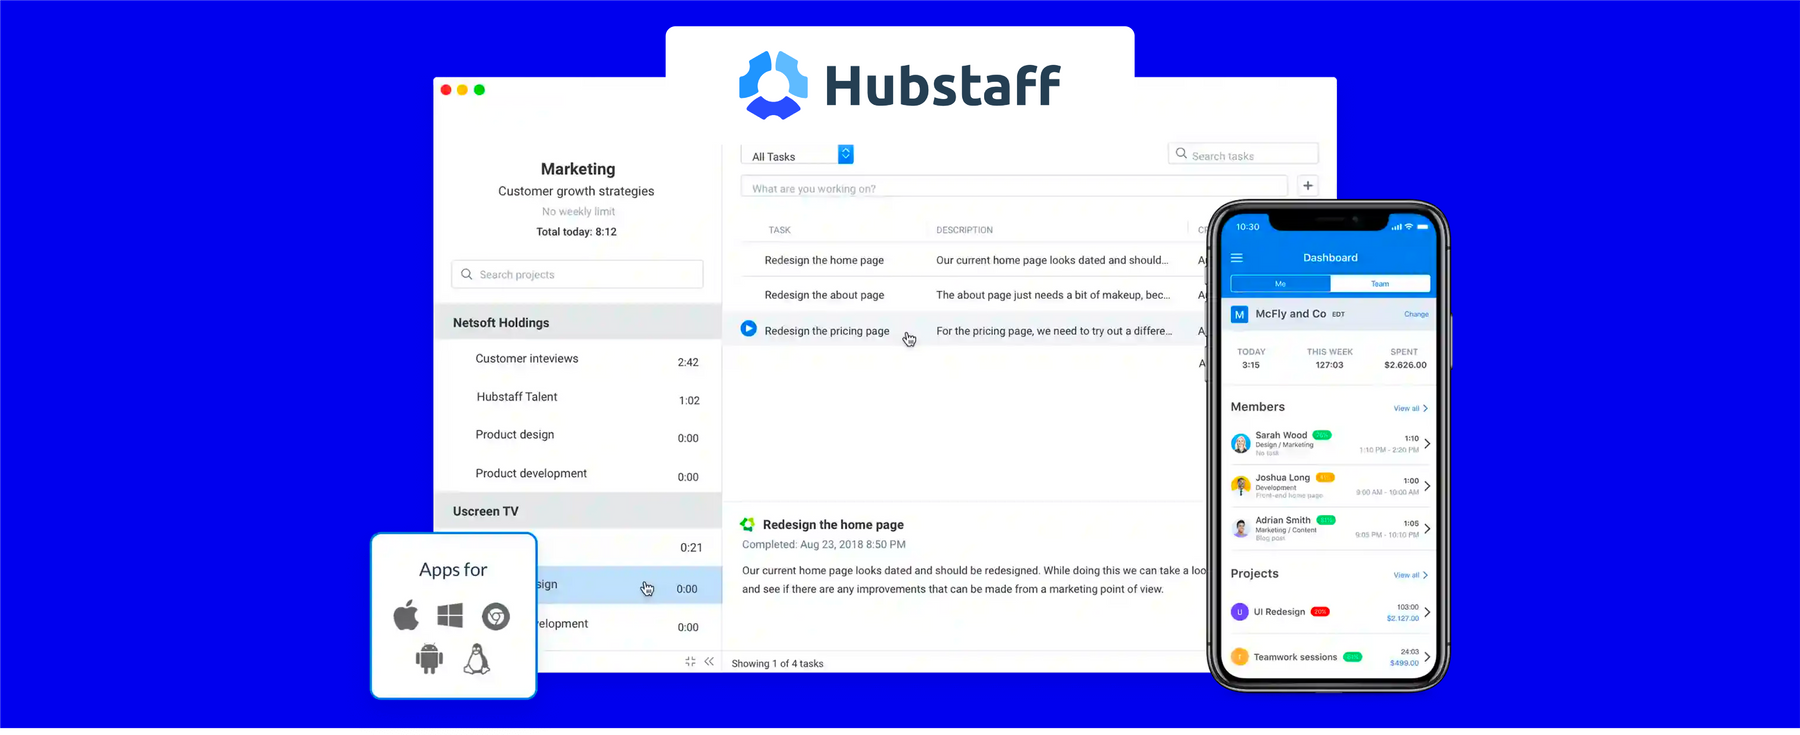 Hubstaff Review- An In-Depth Research in 2021